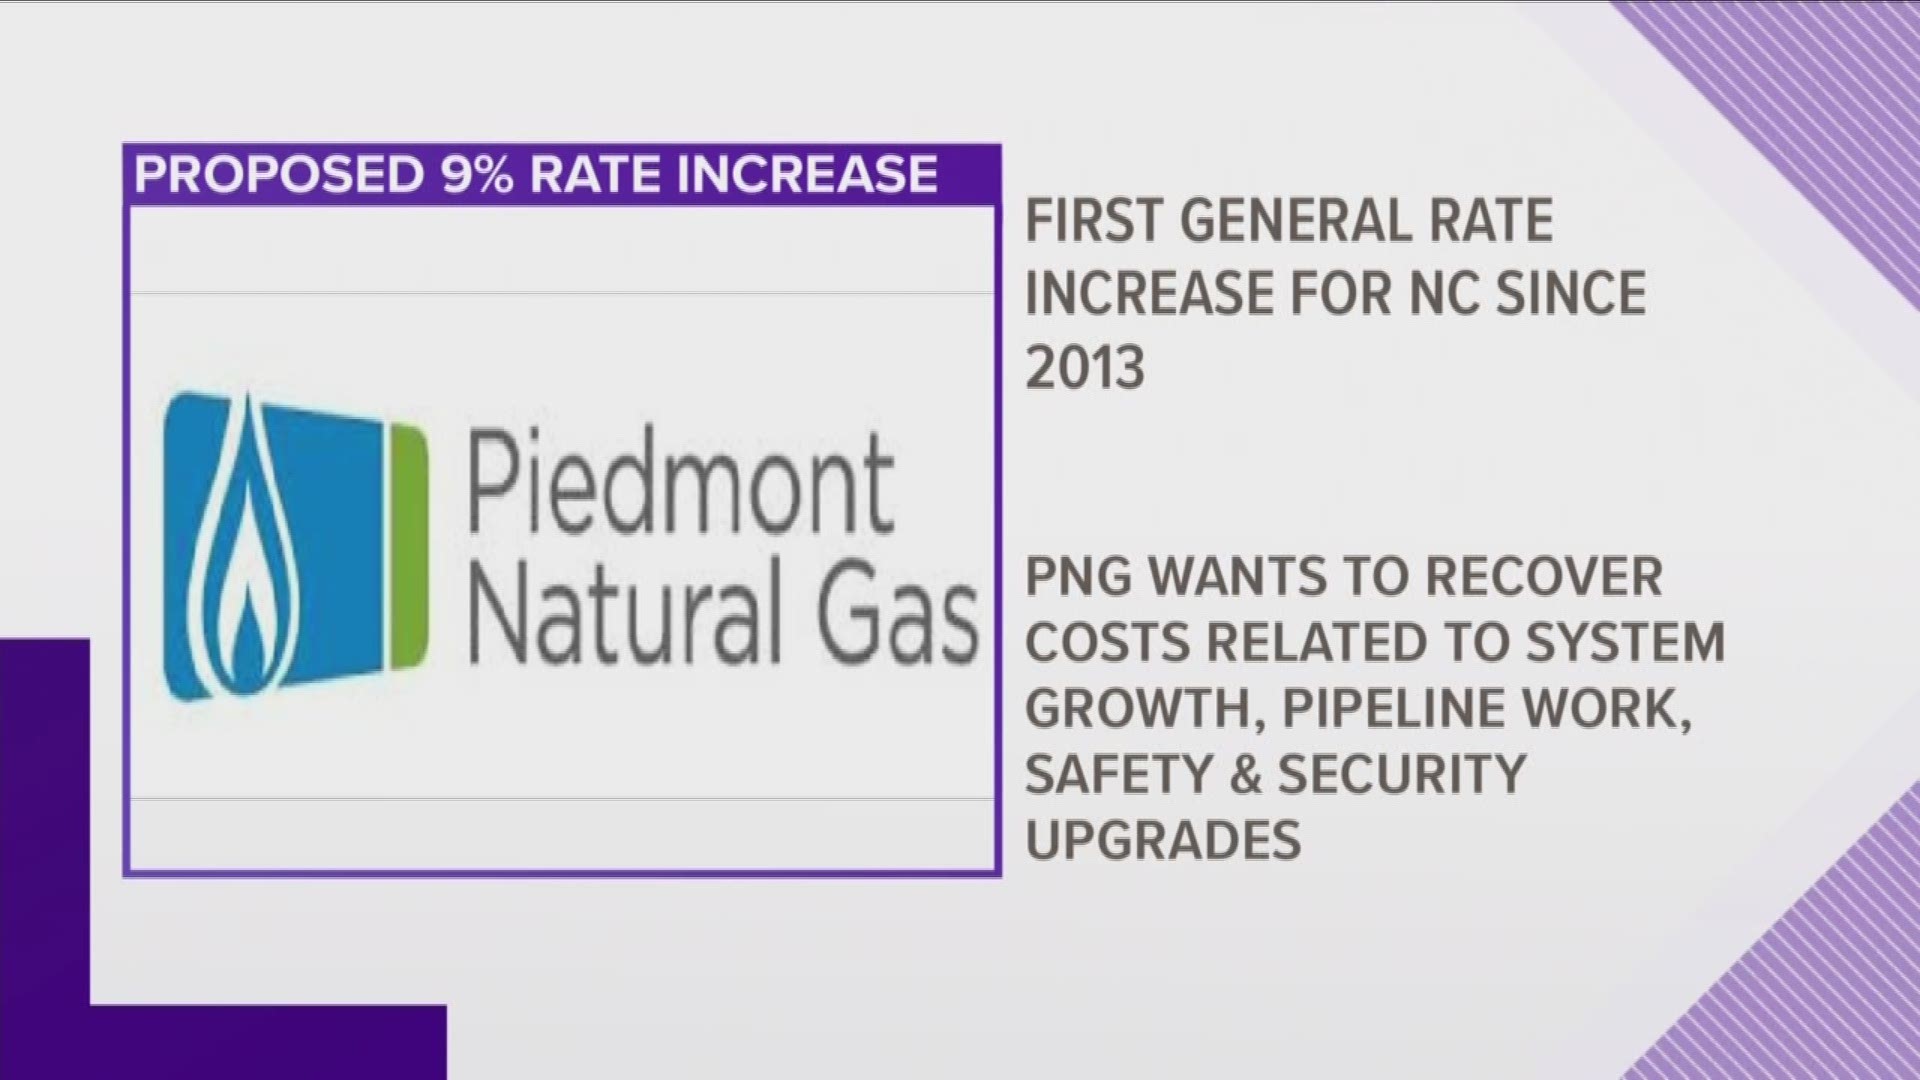 piedmont-natural-gas-service-request-cray-cray-online-diary-photo-galery